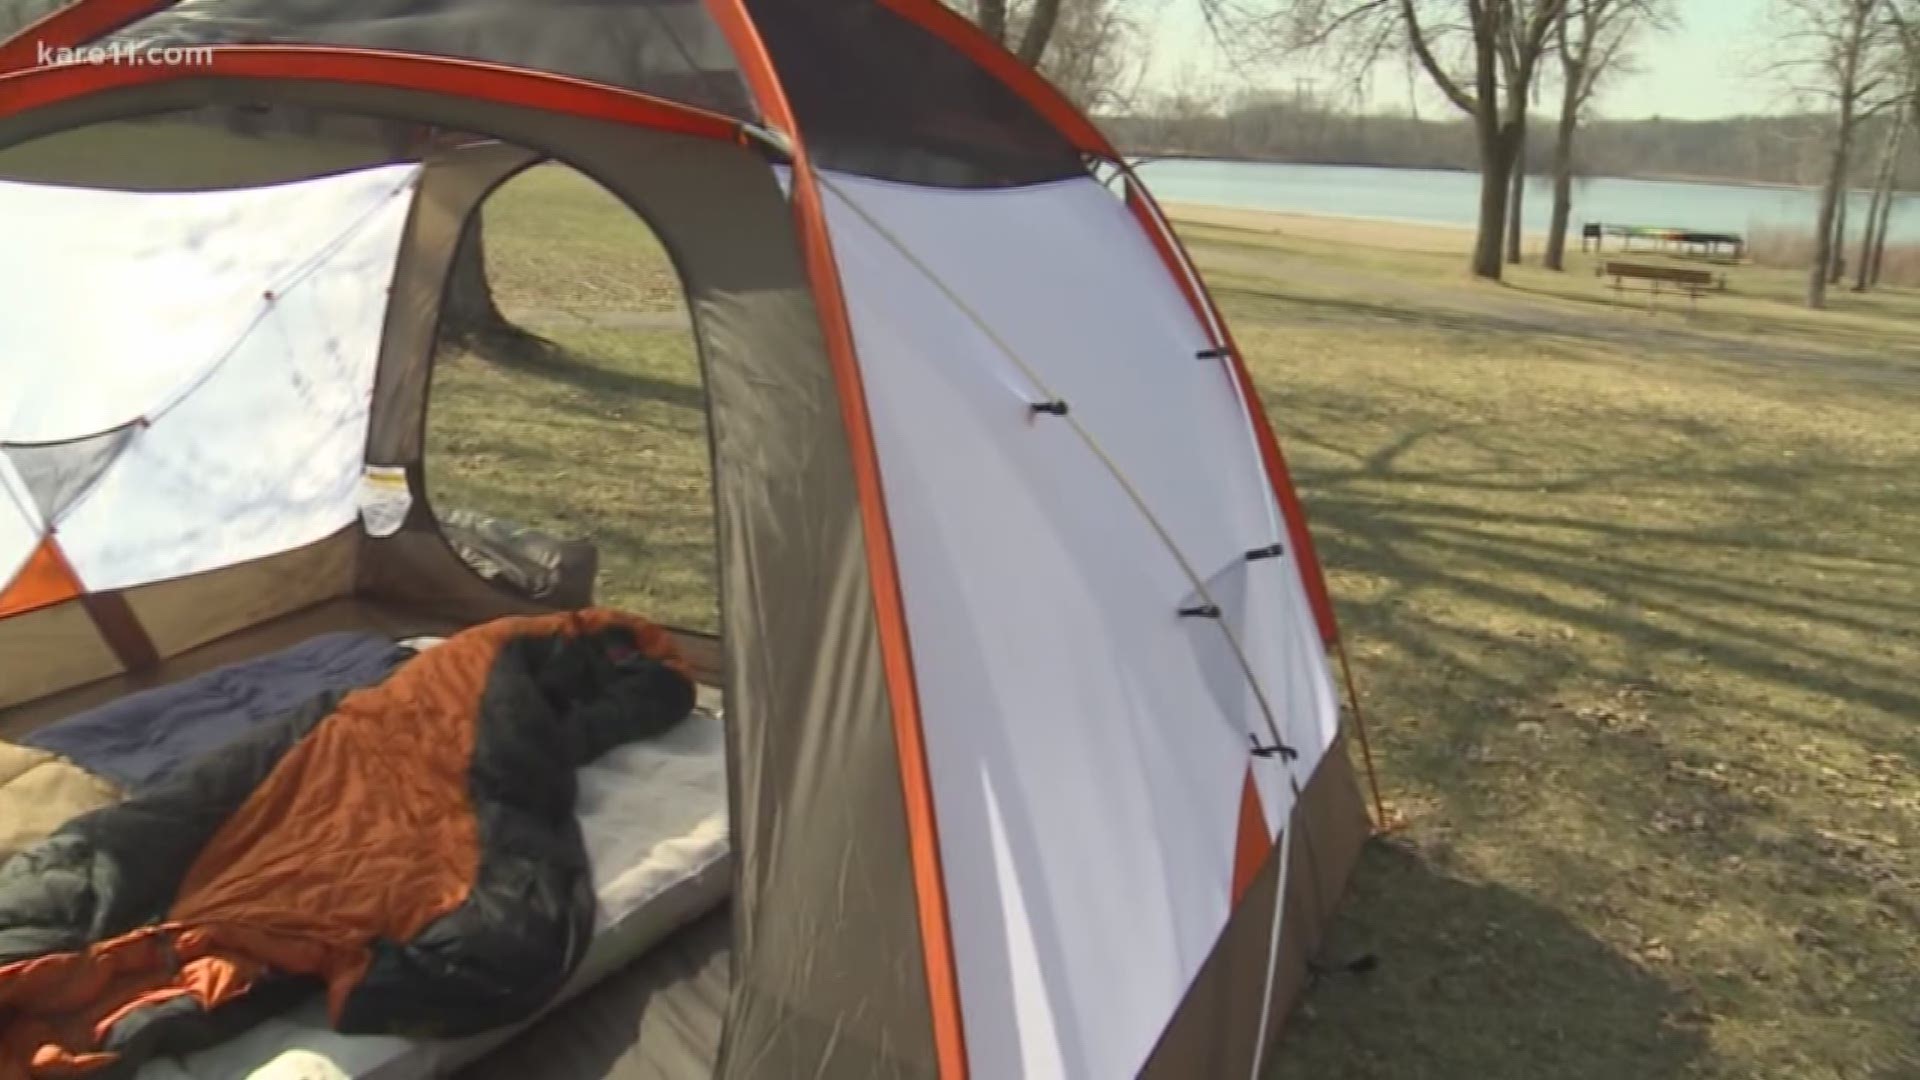 Kids, young adults and families love to camp at the Y, and they even feature Camp ForeverWell for members of the 55+ community. https://kare11.tv/2PdmyfN